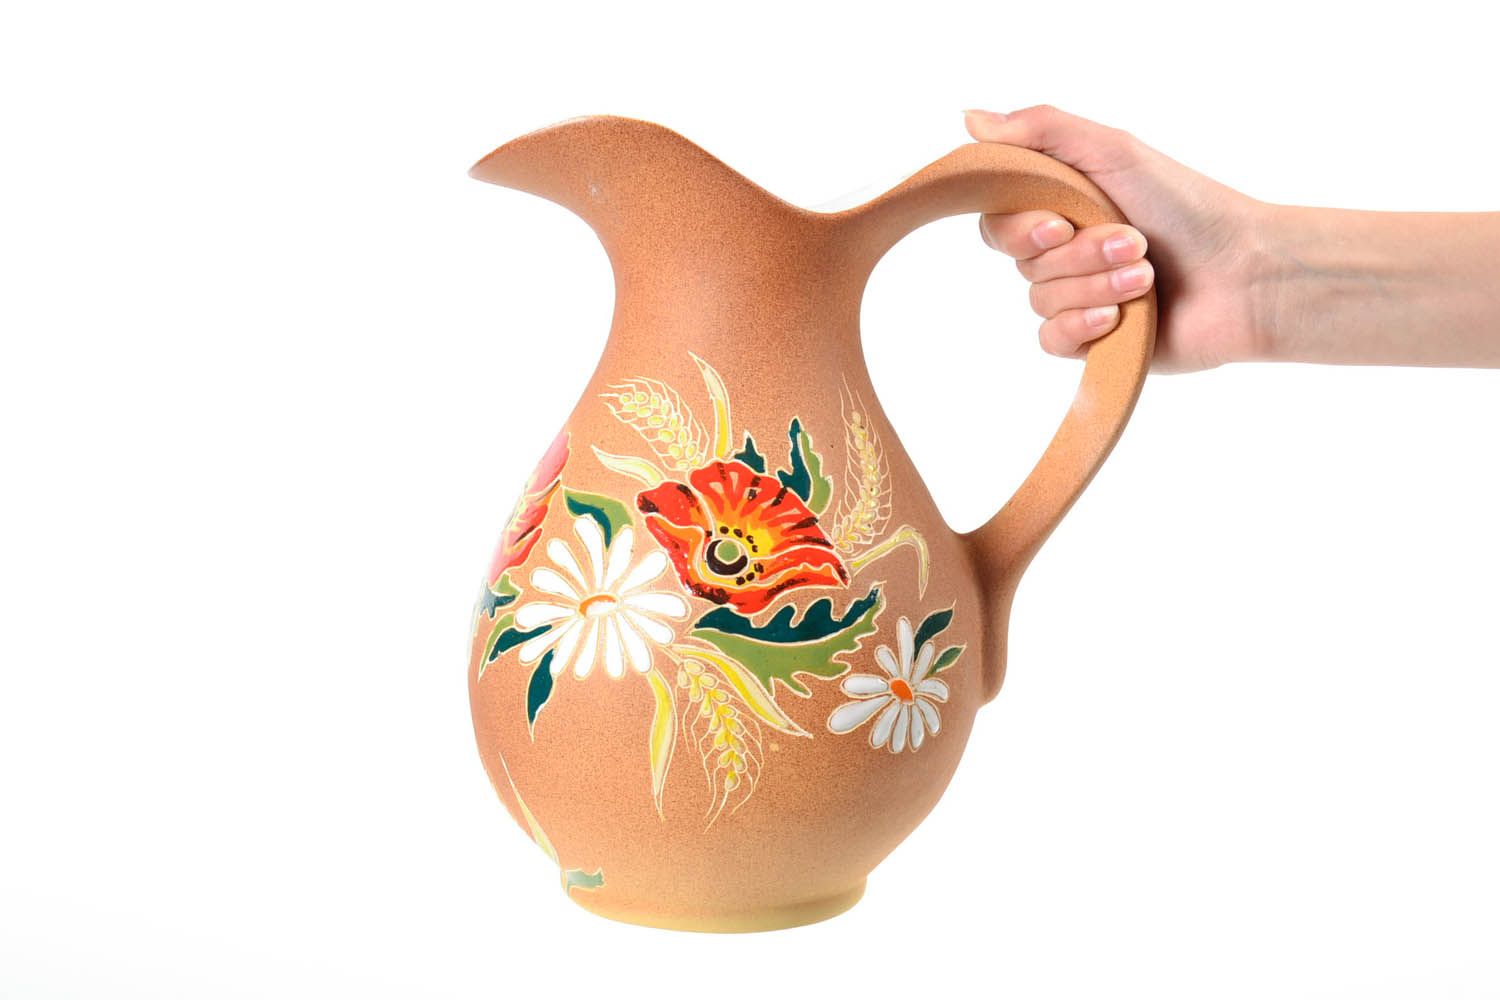 100 oz ceramic handmade water pitcher jug with handle and floral décor 4 lb photo 2